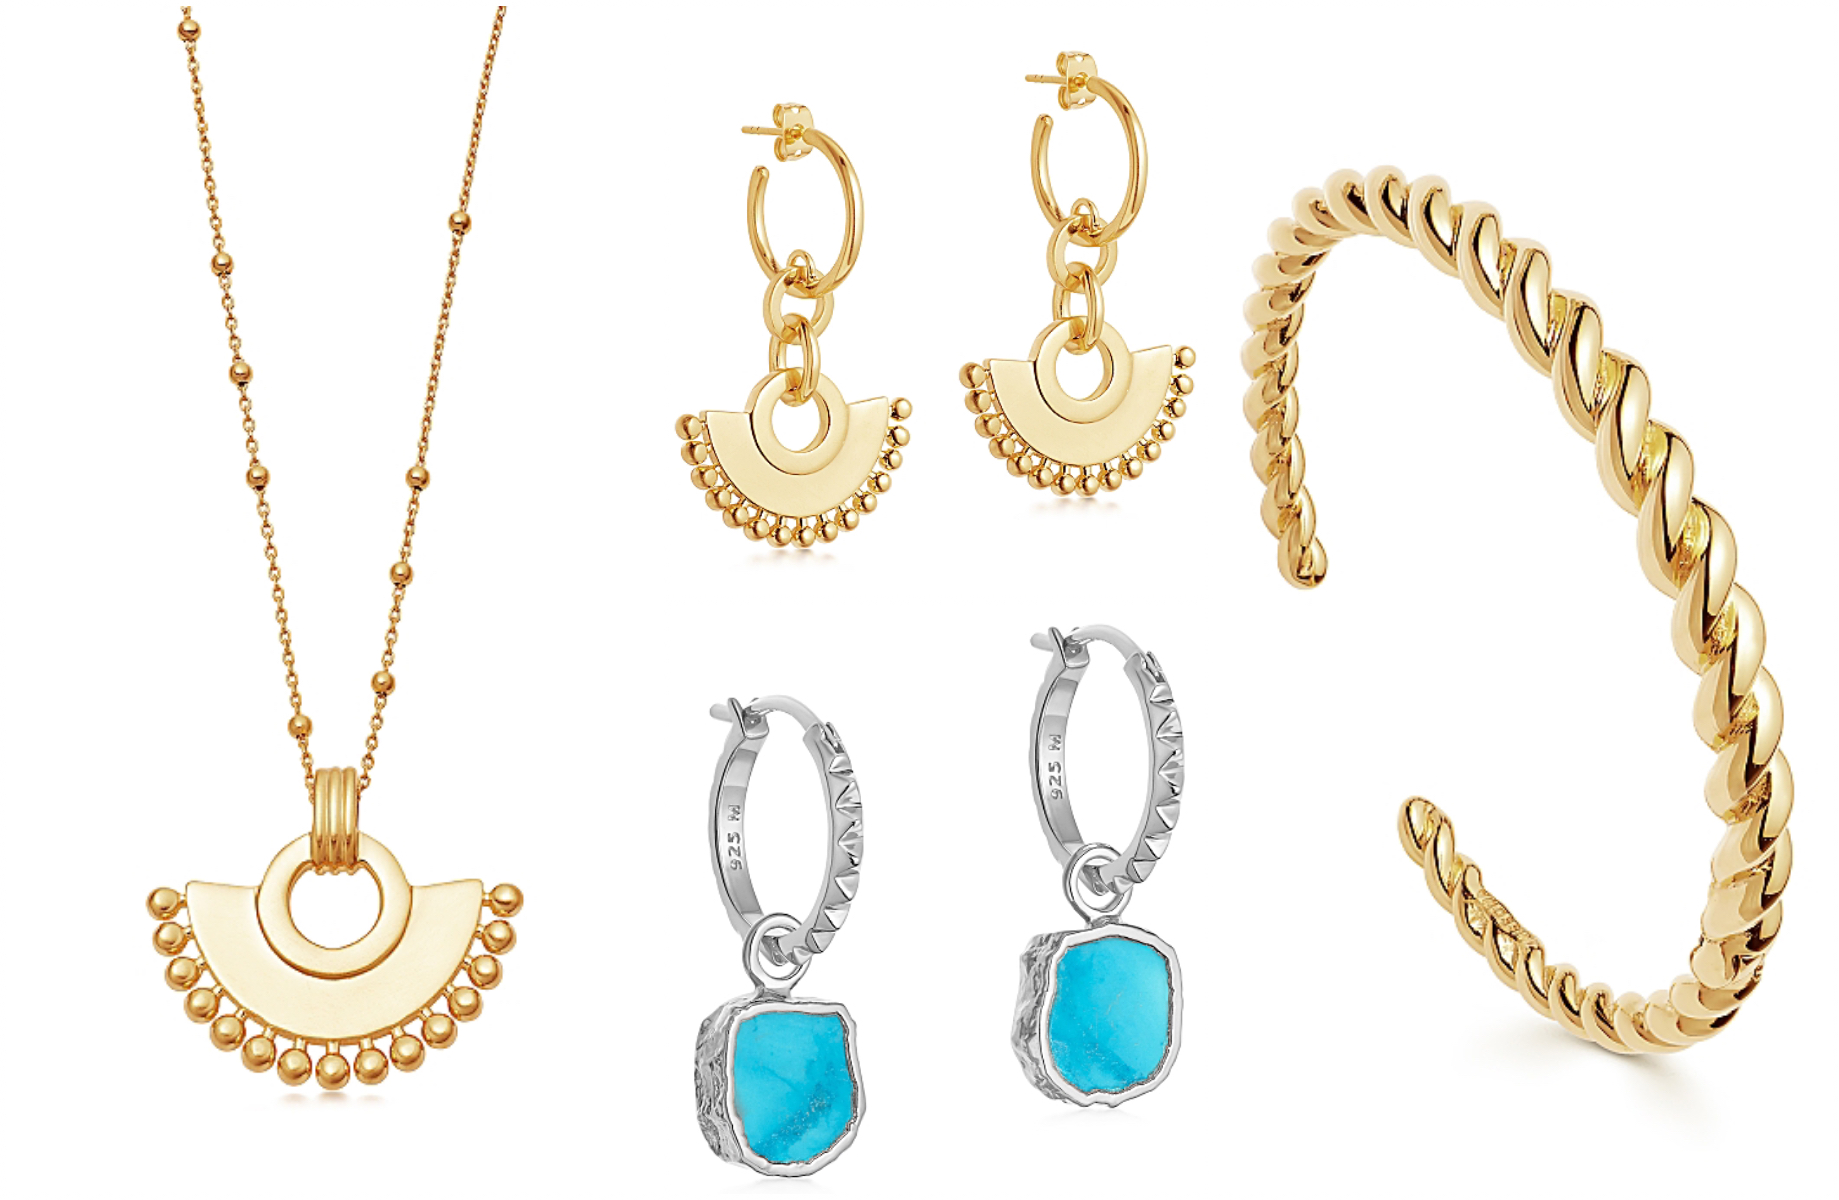 Benchpeg | Top Jewellery Brands To Shop in 2020